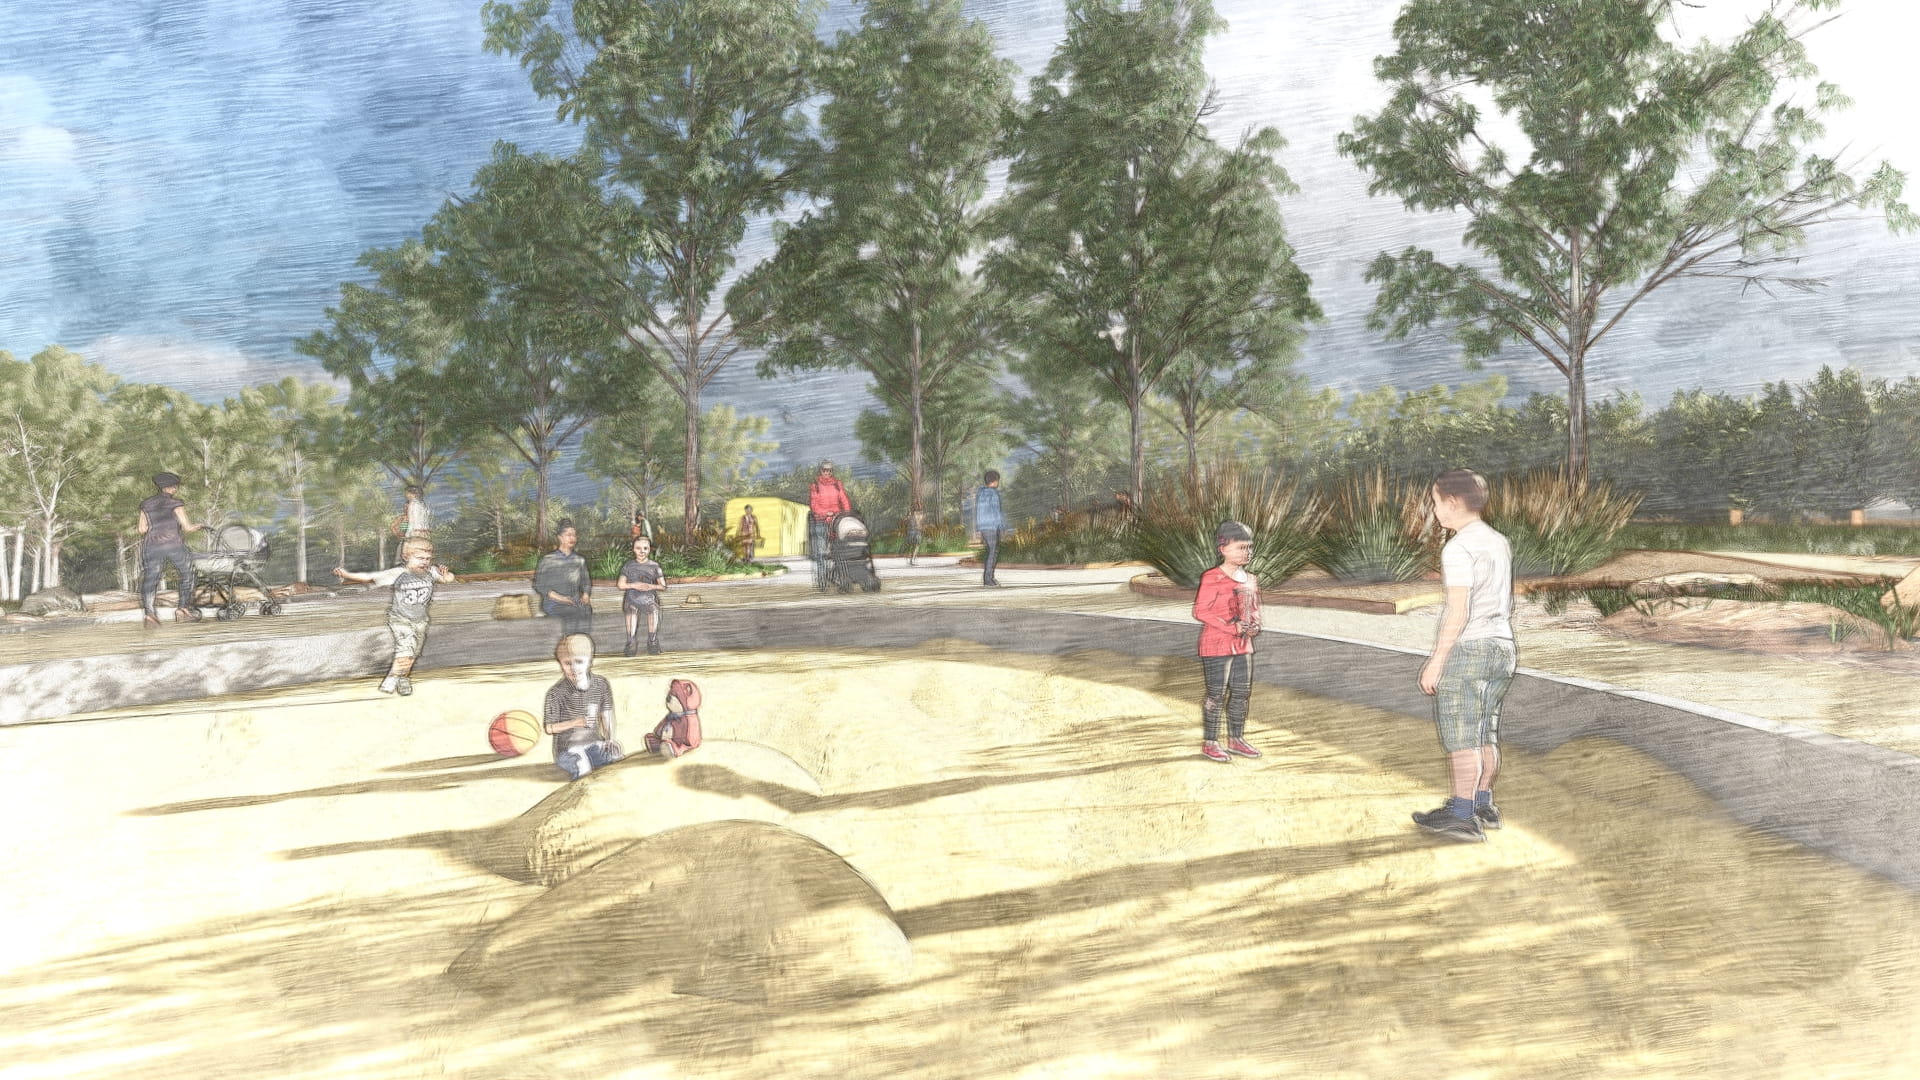 Sand play area design for the new playscape at Wattle Park